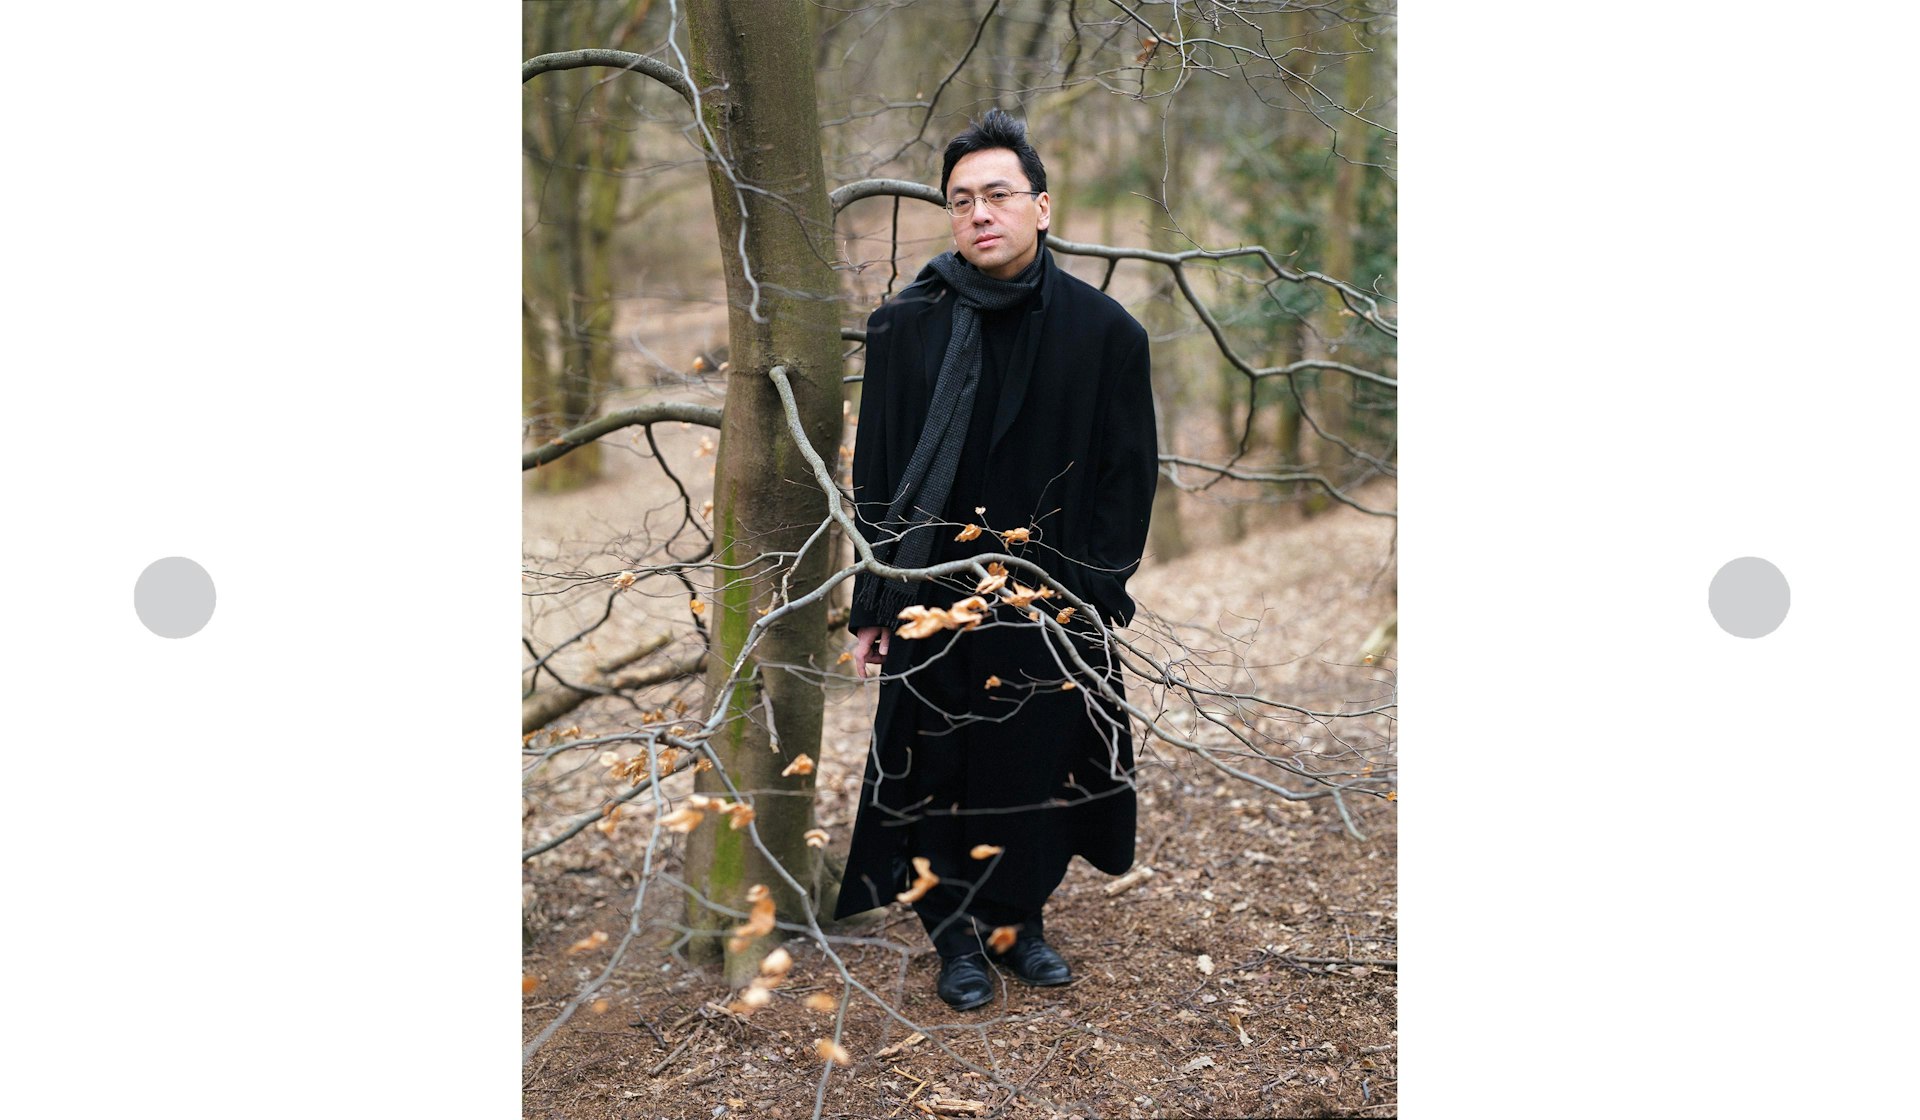 Kazuo Ishiguro had to work a tough job to truly understand human nature